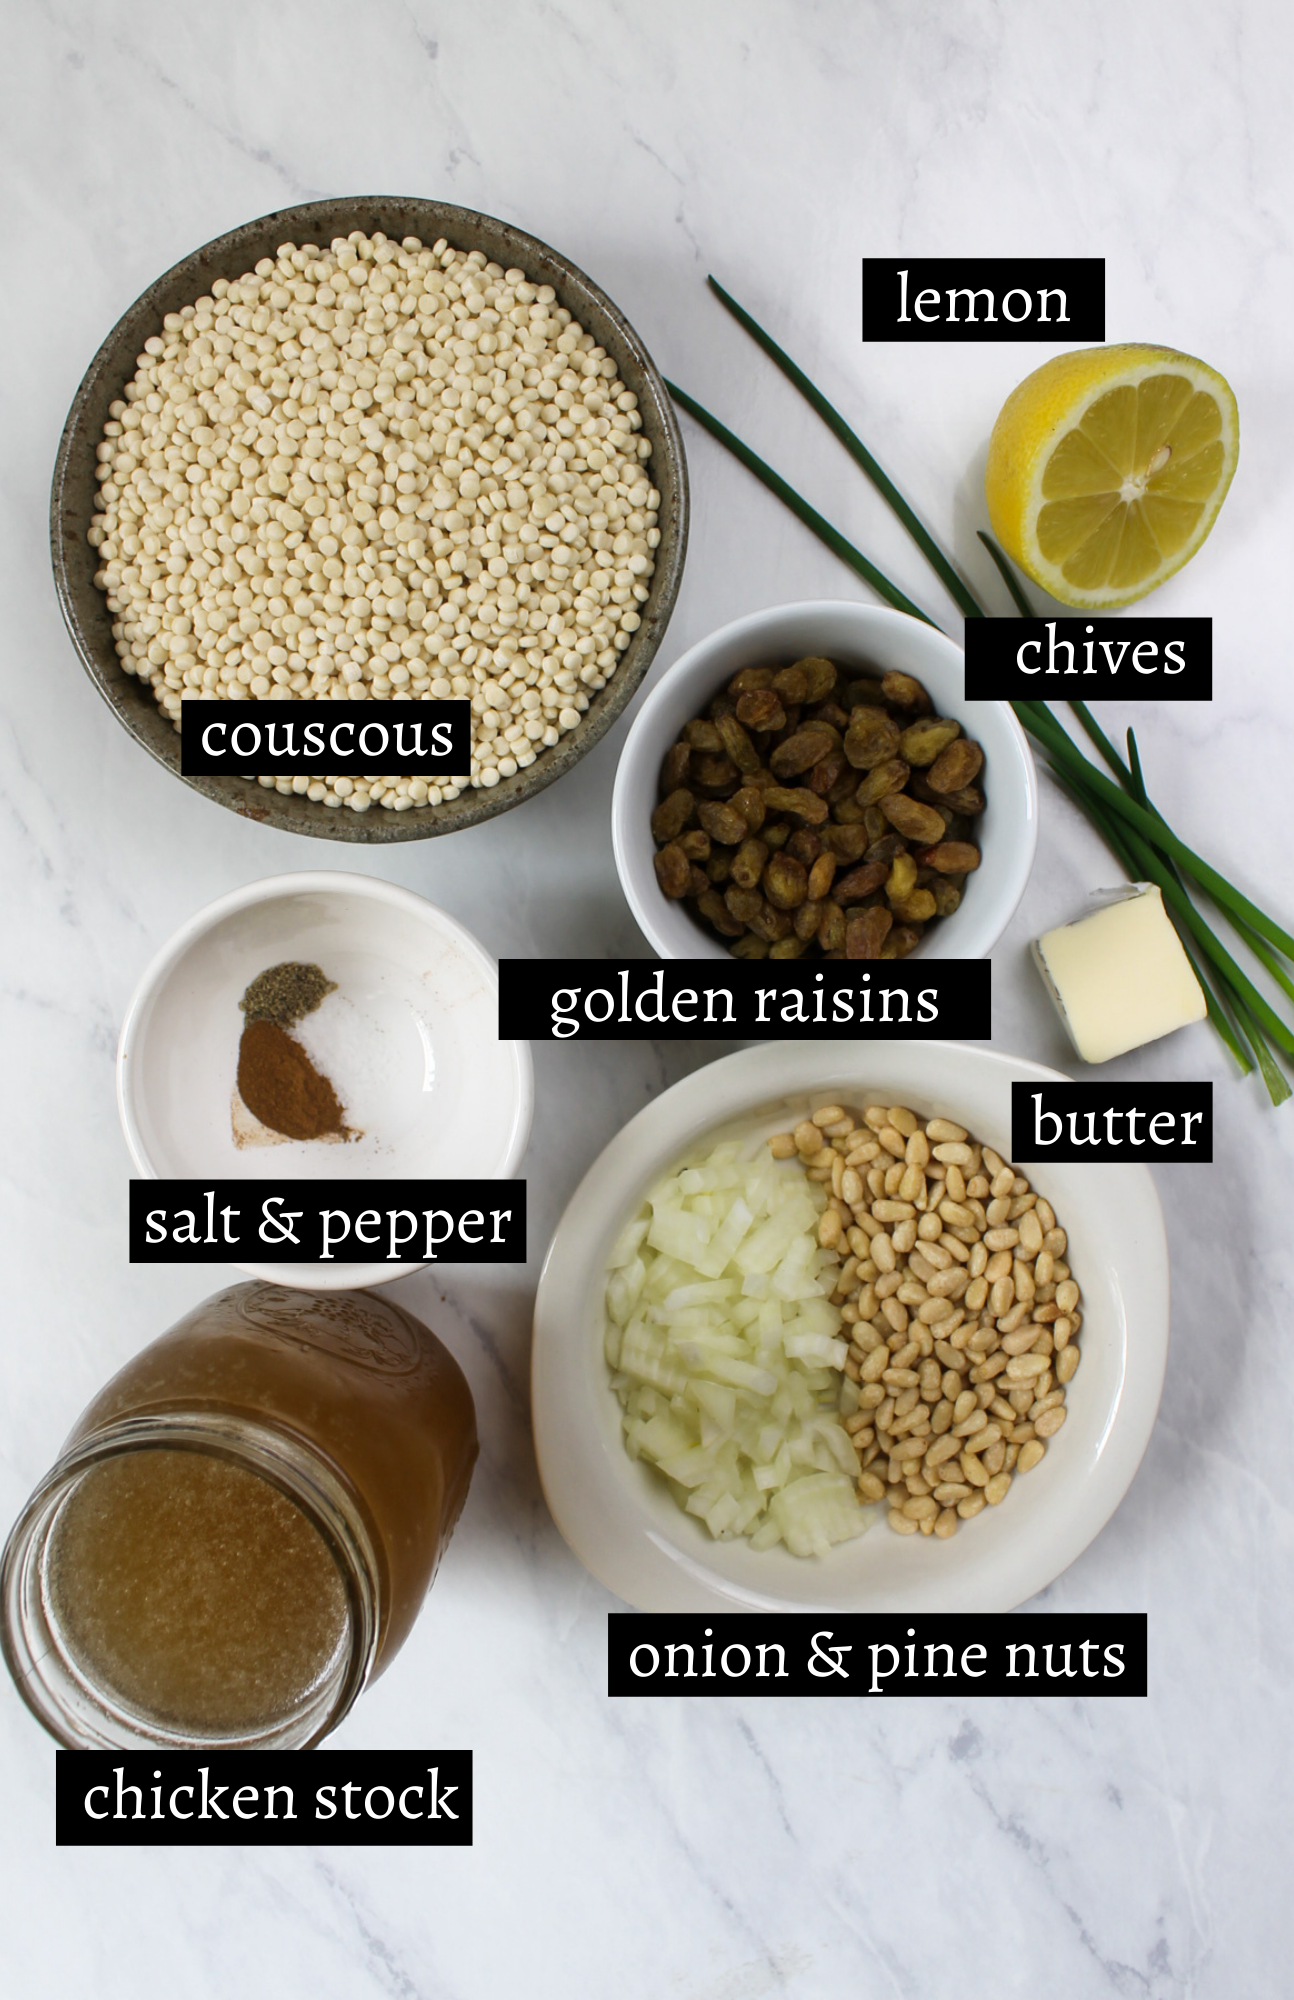 Labeled ingredients for couscous to go with roasted chicken.